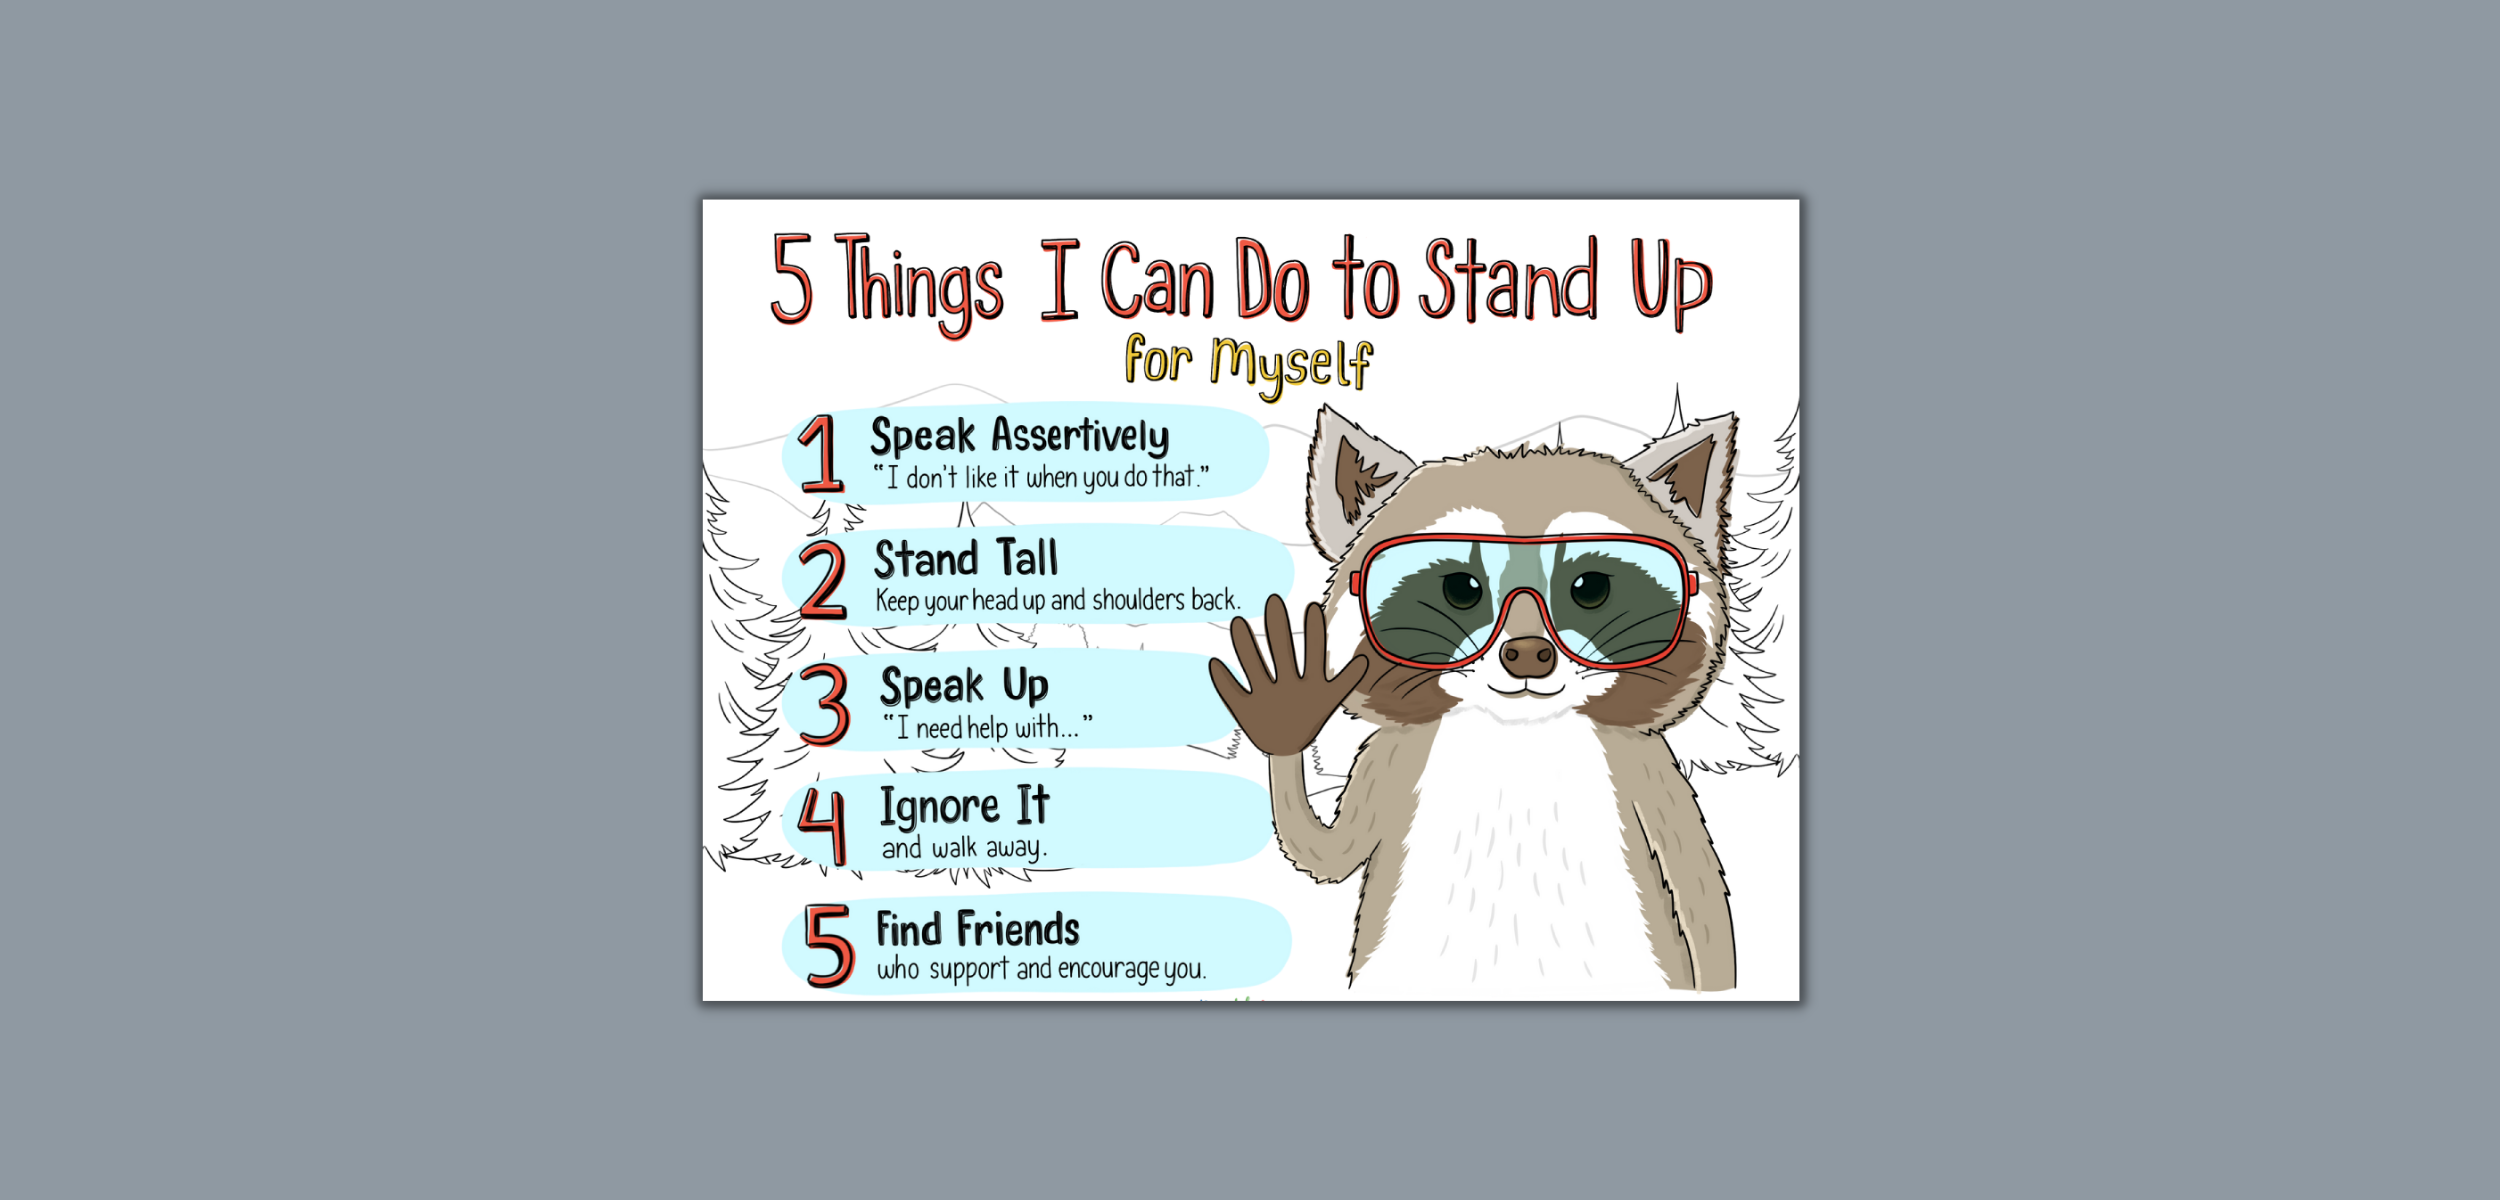 5 things I can do to stand up